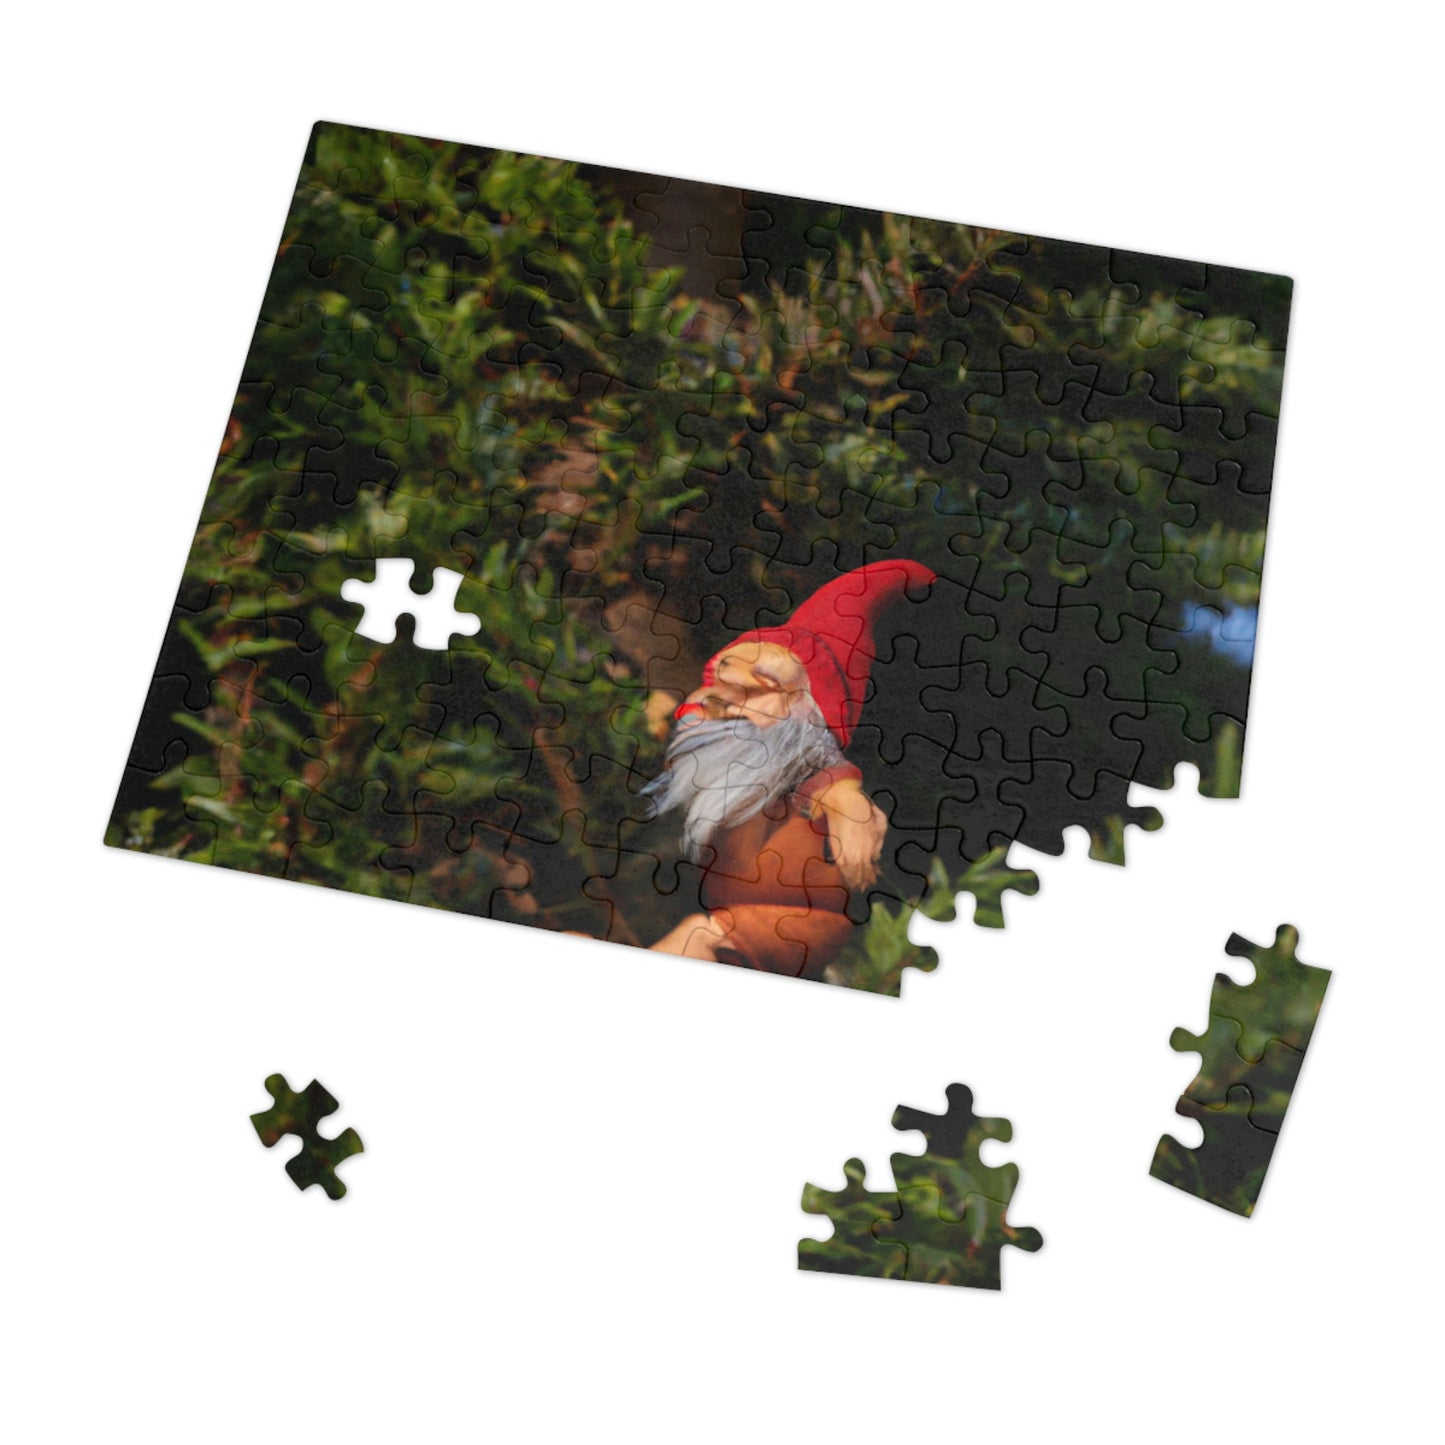 The Gnome's High-Rise Adventure - The Alien Jigsaw Puzzle